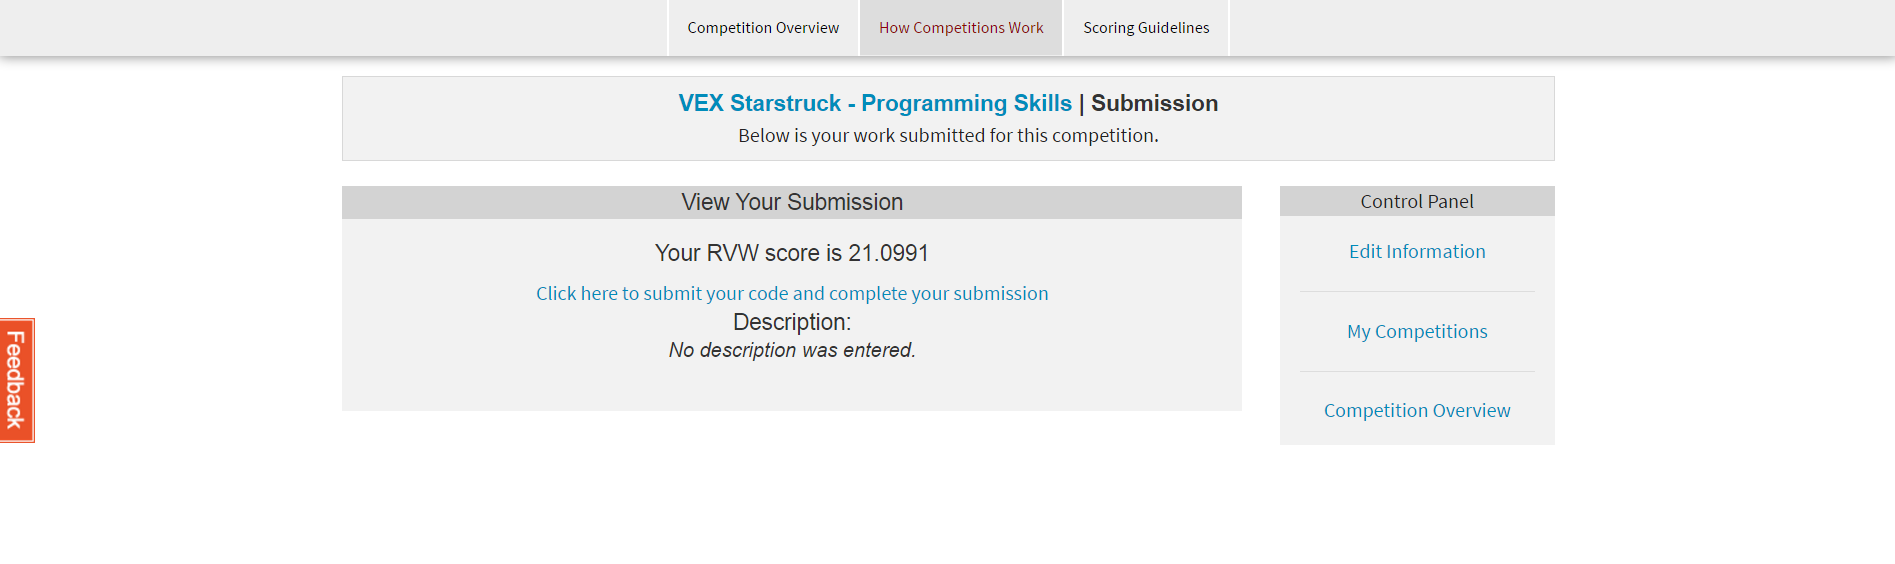 Programming Skills Submission.PNG